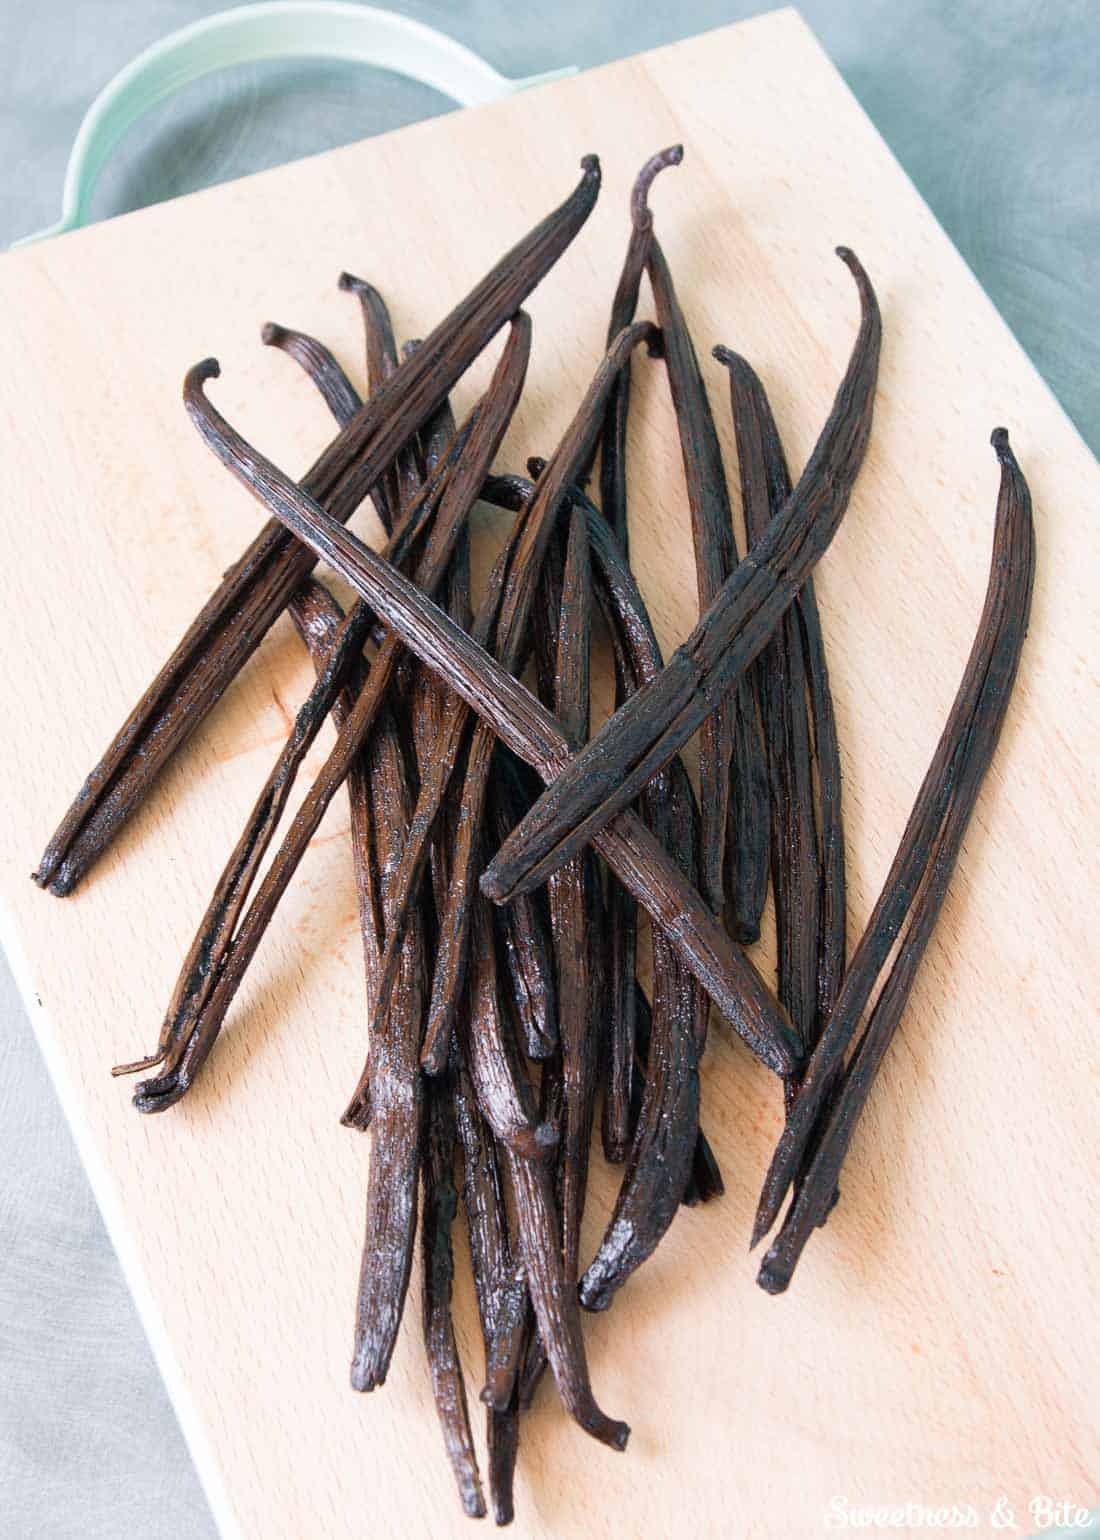 A pile of plump vanilla beans on a wooden chopping board.